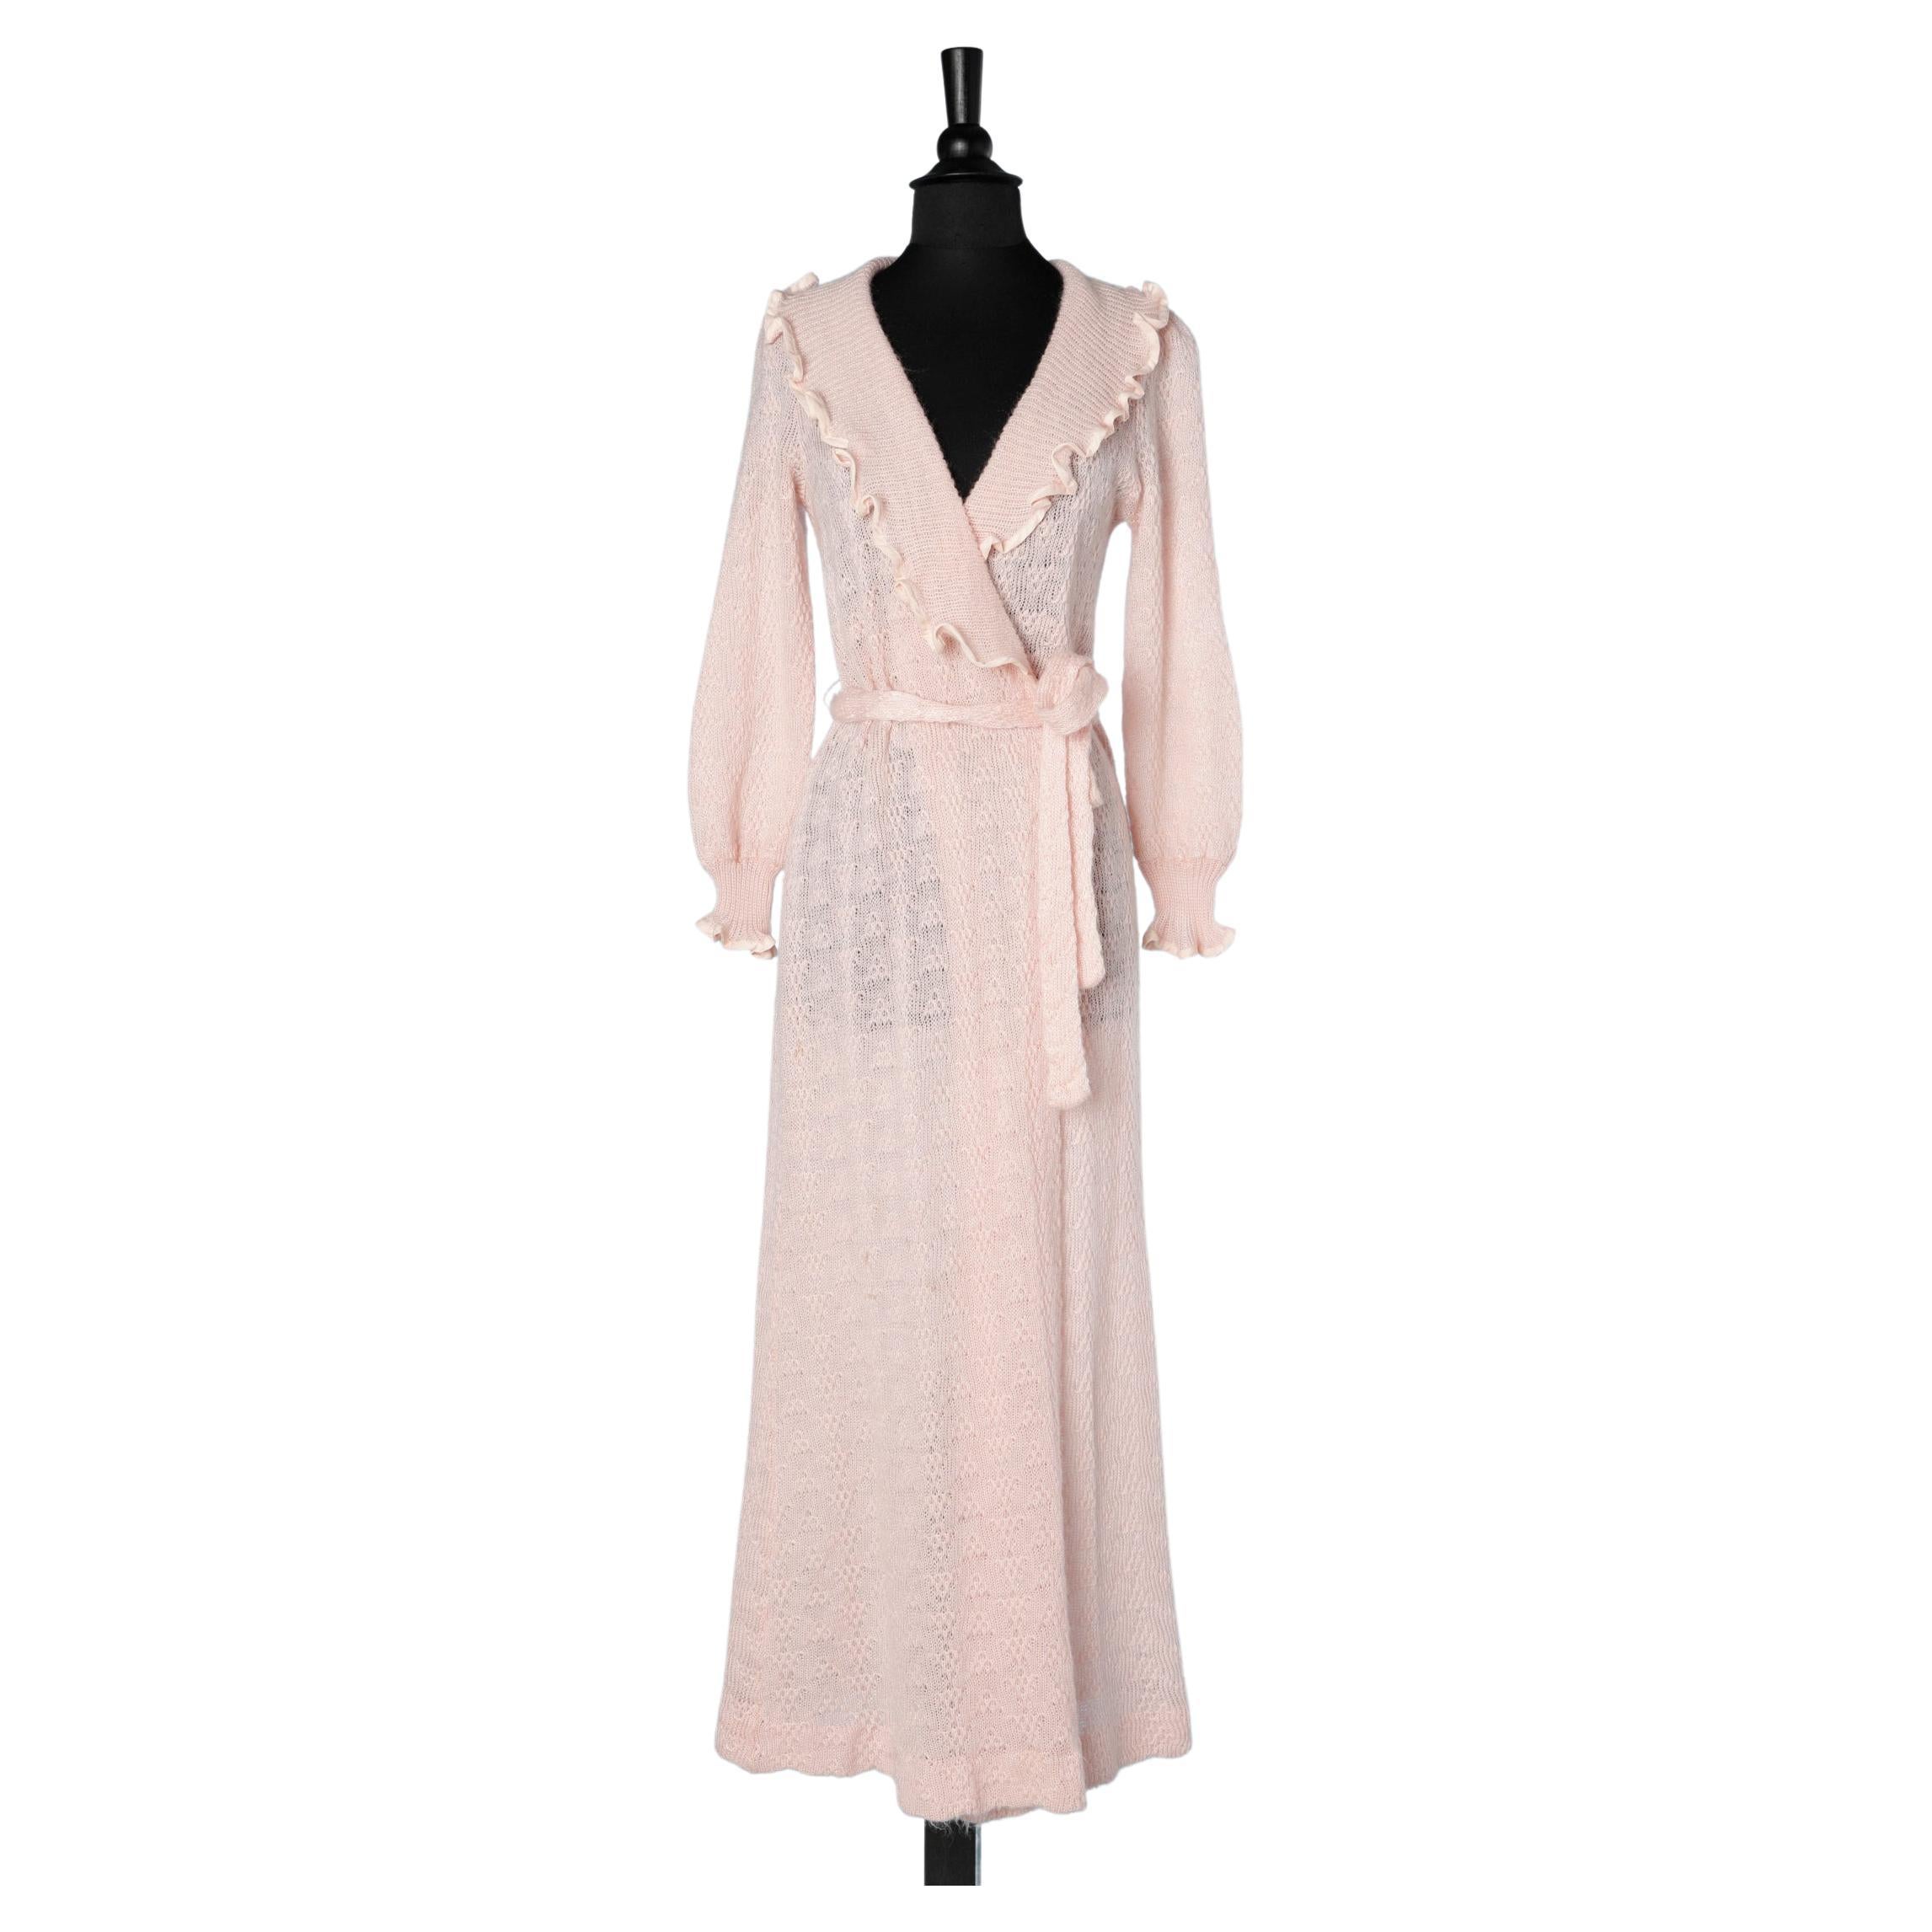 Pale pink knit Robe Christian Dior Lingerie 